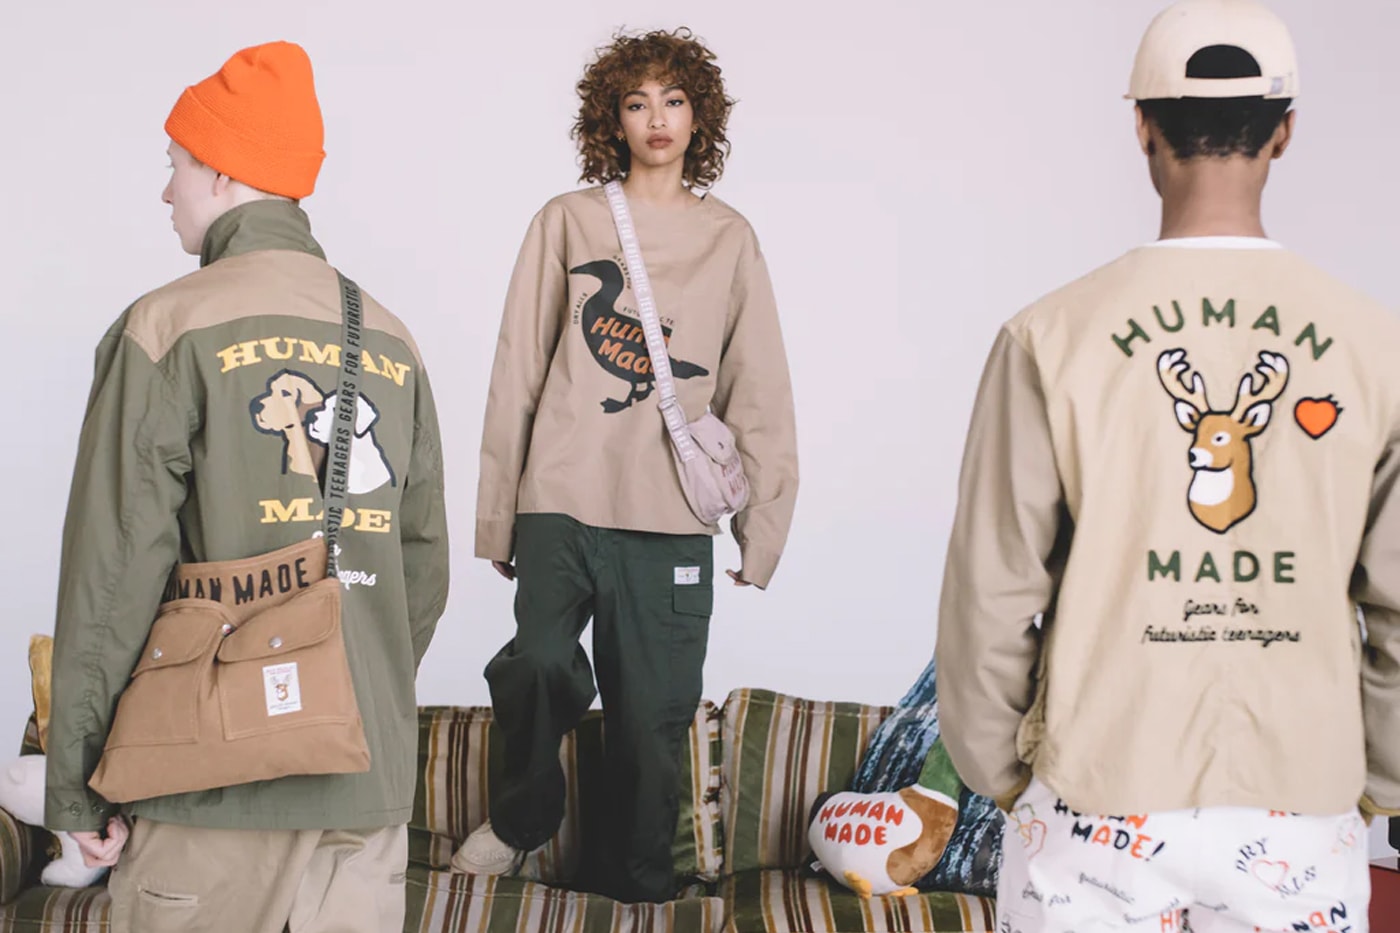 NIGO'S HUMAN MADE SS17 COLLECTION REDEFINES 'TASTEFUL' - The Drop Date